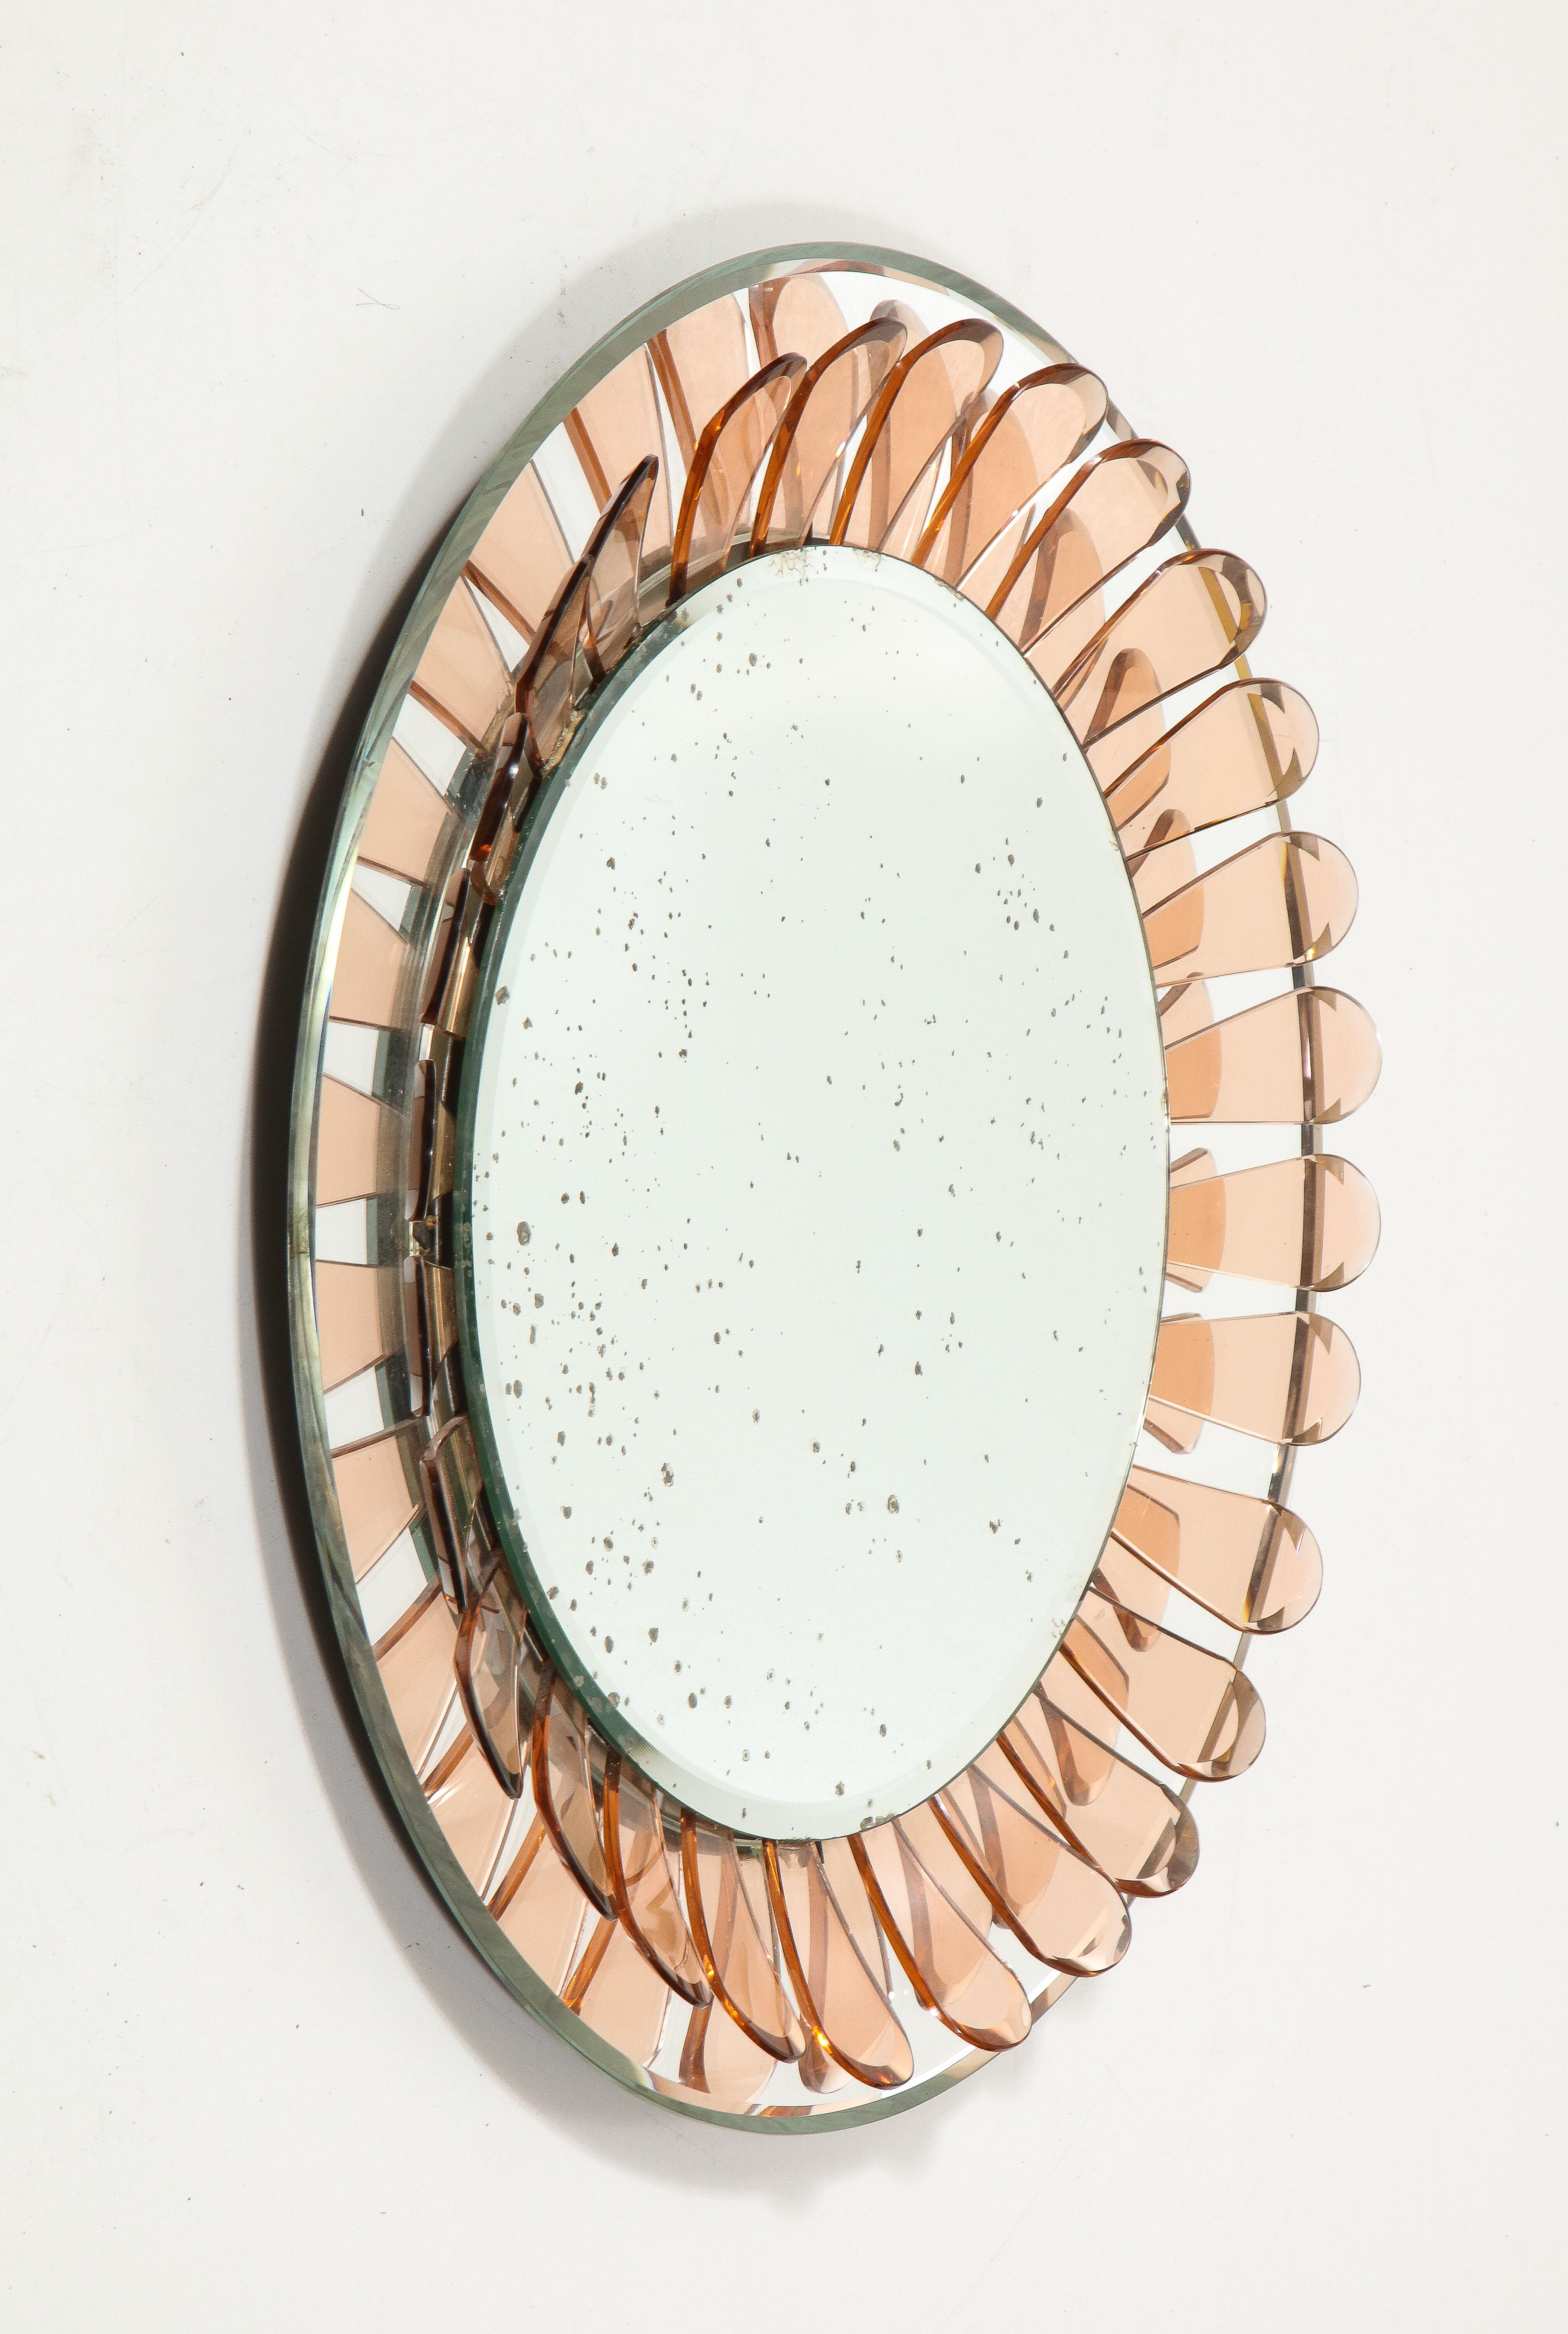 Wall mirror by Max Ingrand for Fontana Arte, Italy, circa. 1960.

This striking, flower-shaped wall mirror designed by Max Ingrand features curved pink petals and beautifully patinated mirrored glass.